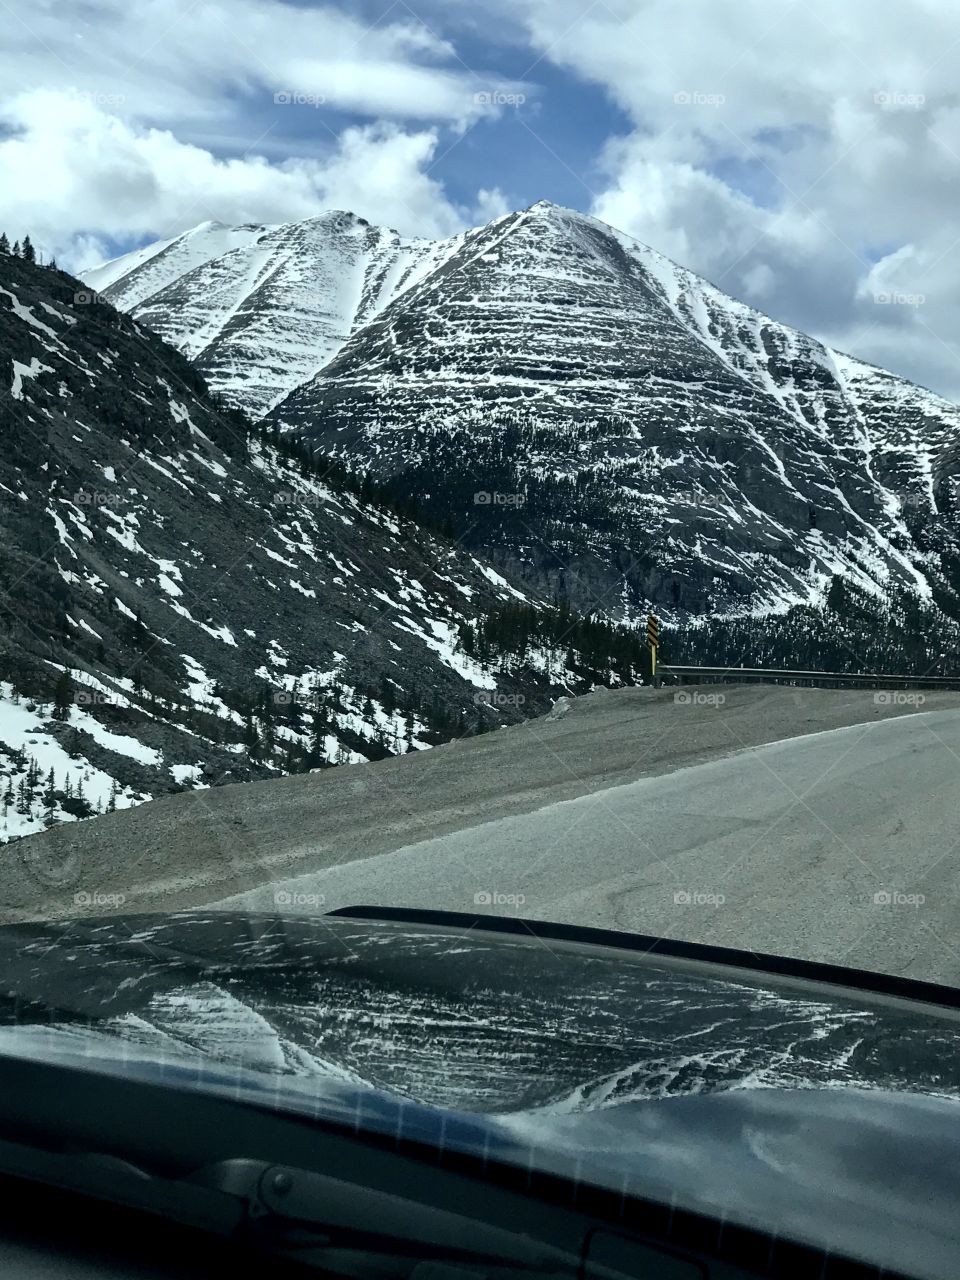 Spring drive on The Alaska Highway - Stone Mountain reflection on the hood